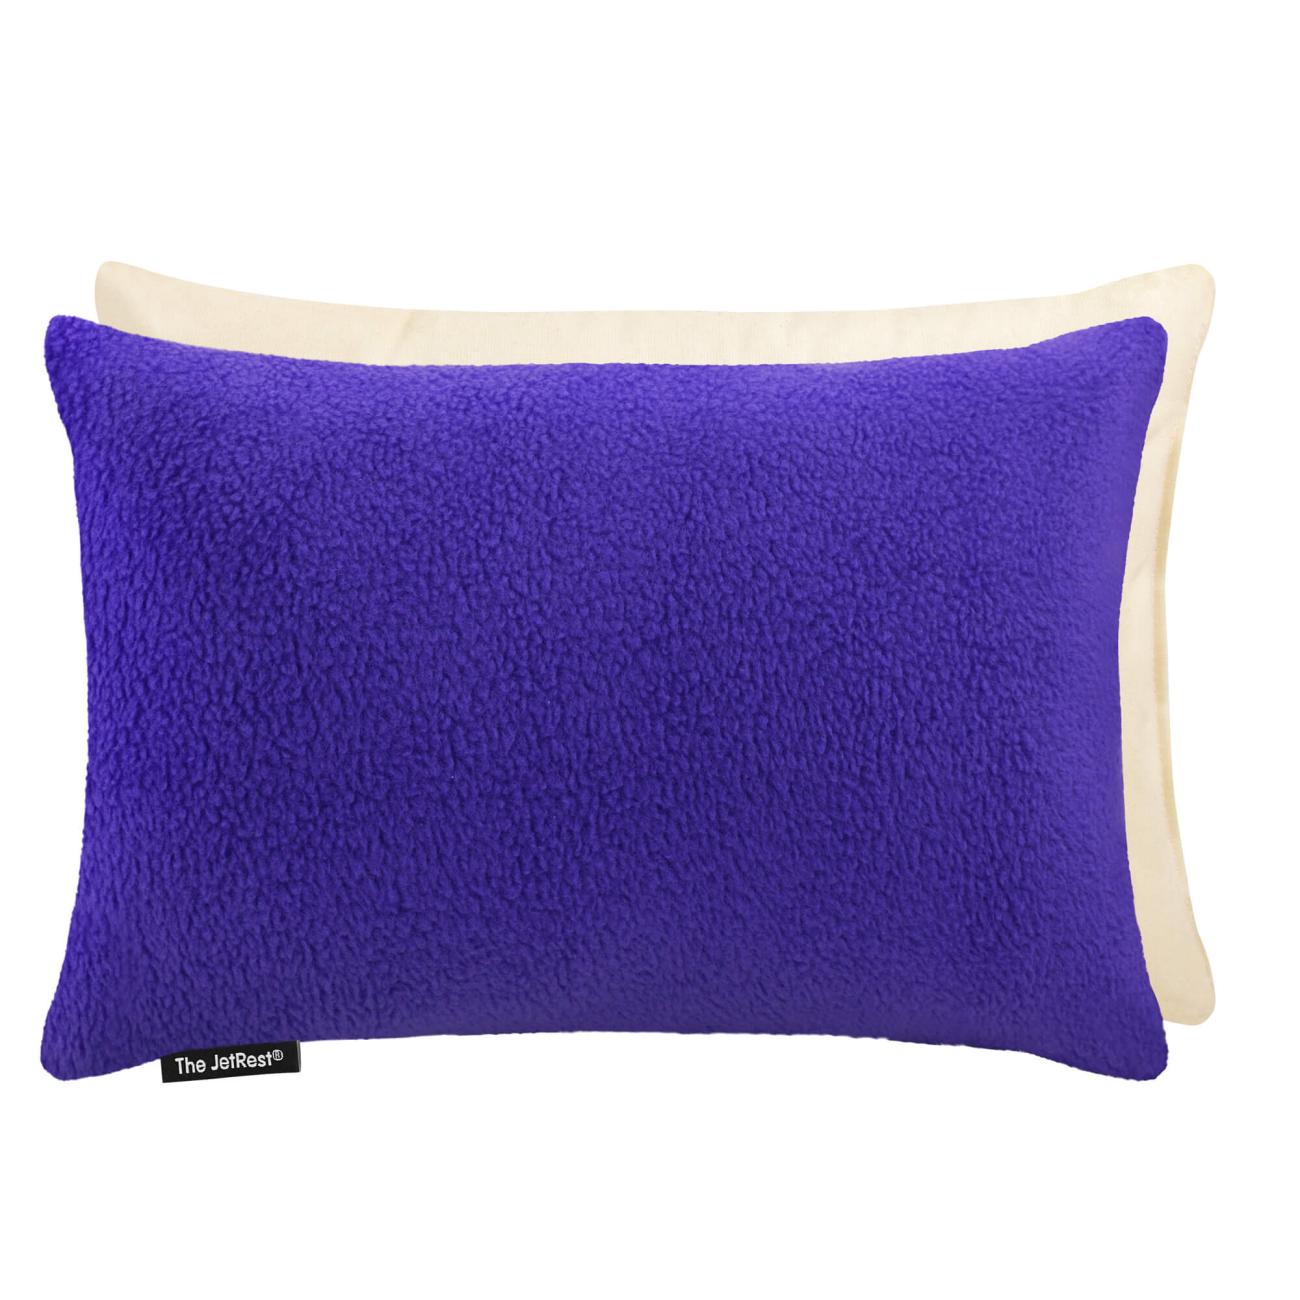 small travel pillow case